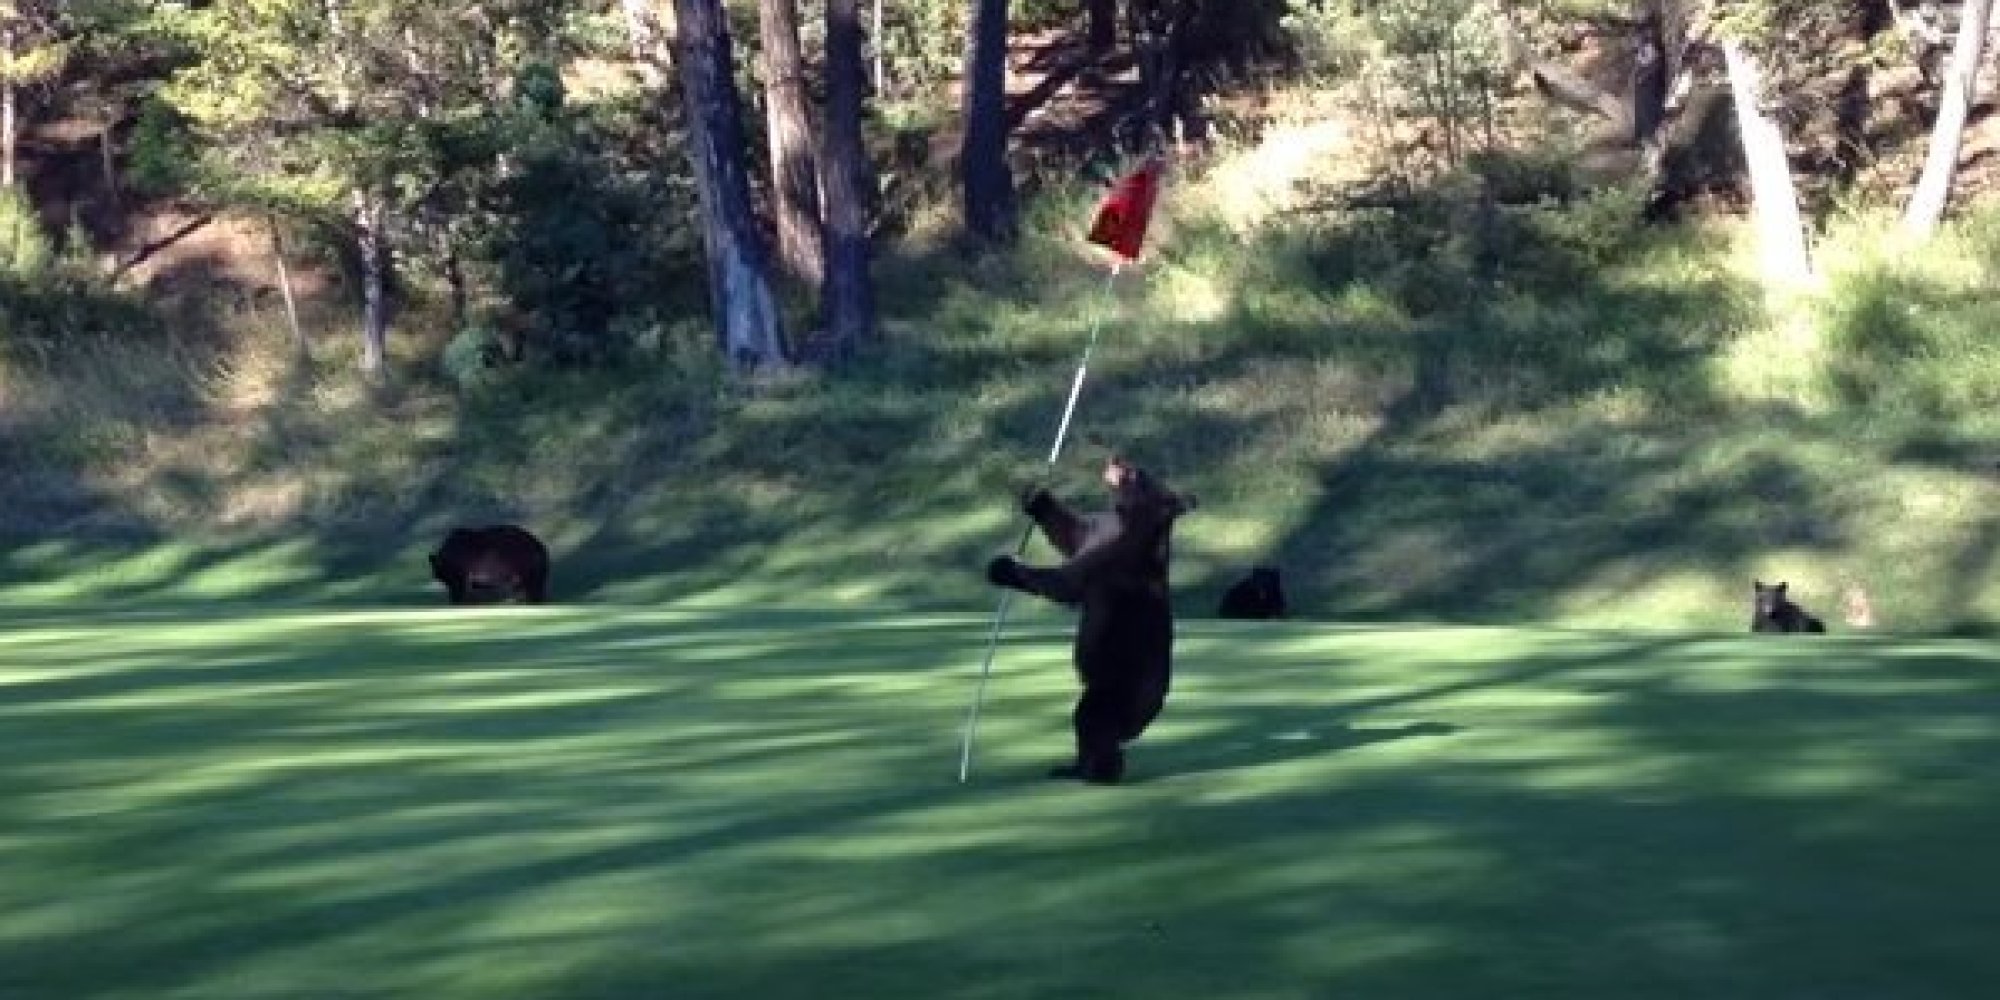 Bear Cub Is Filmed Adorably Playing With A Flag Pole On A Golf Course